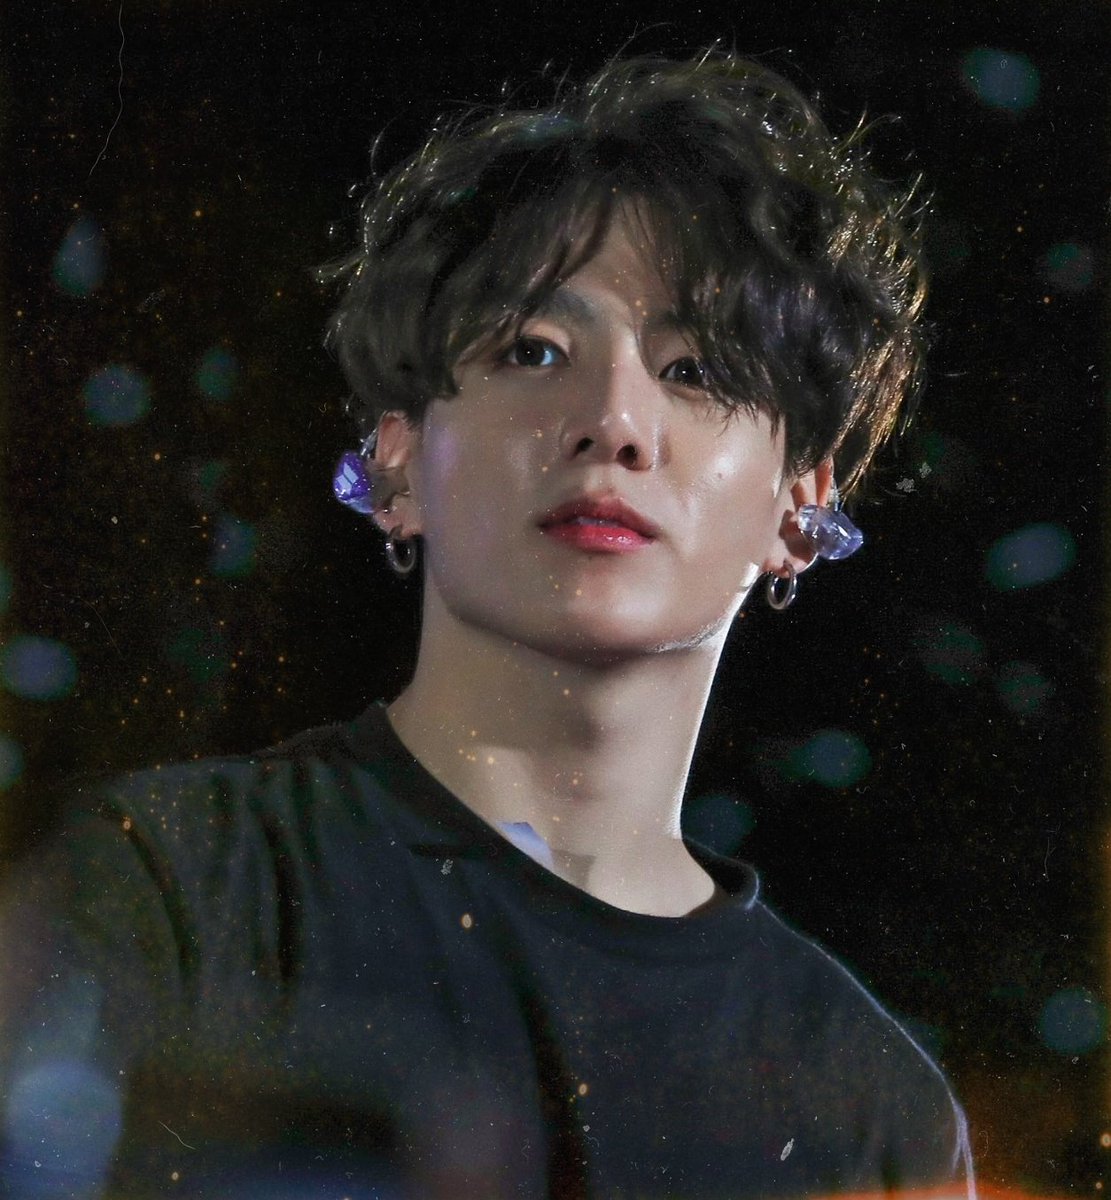 Bts Jungkook Curly Hair - Famous Person